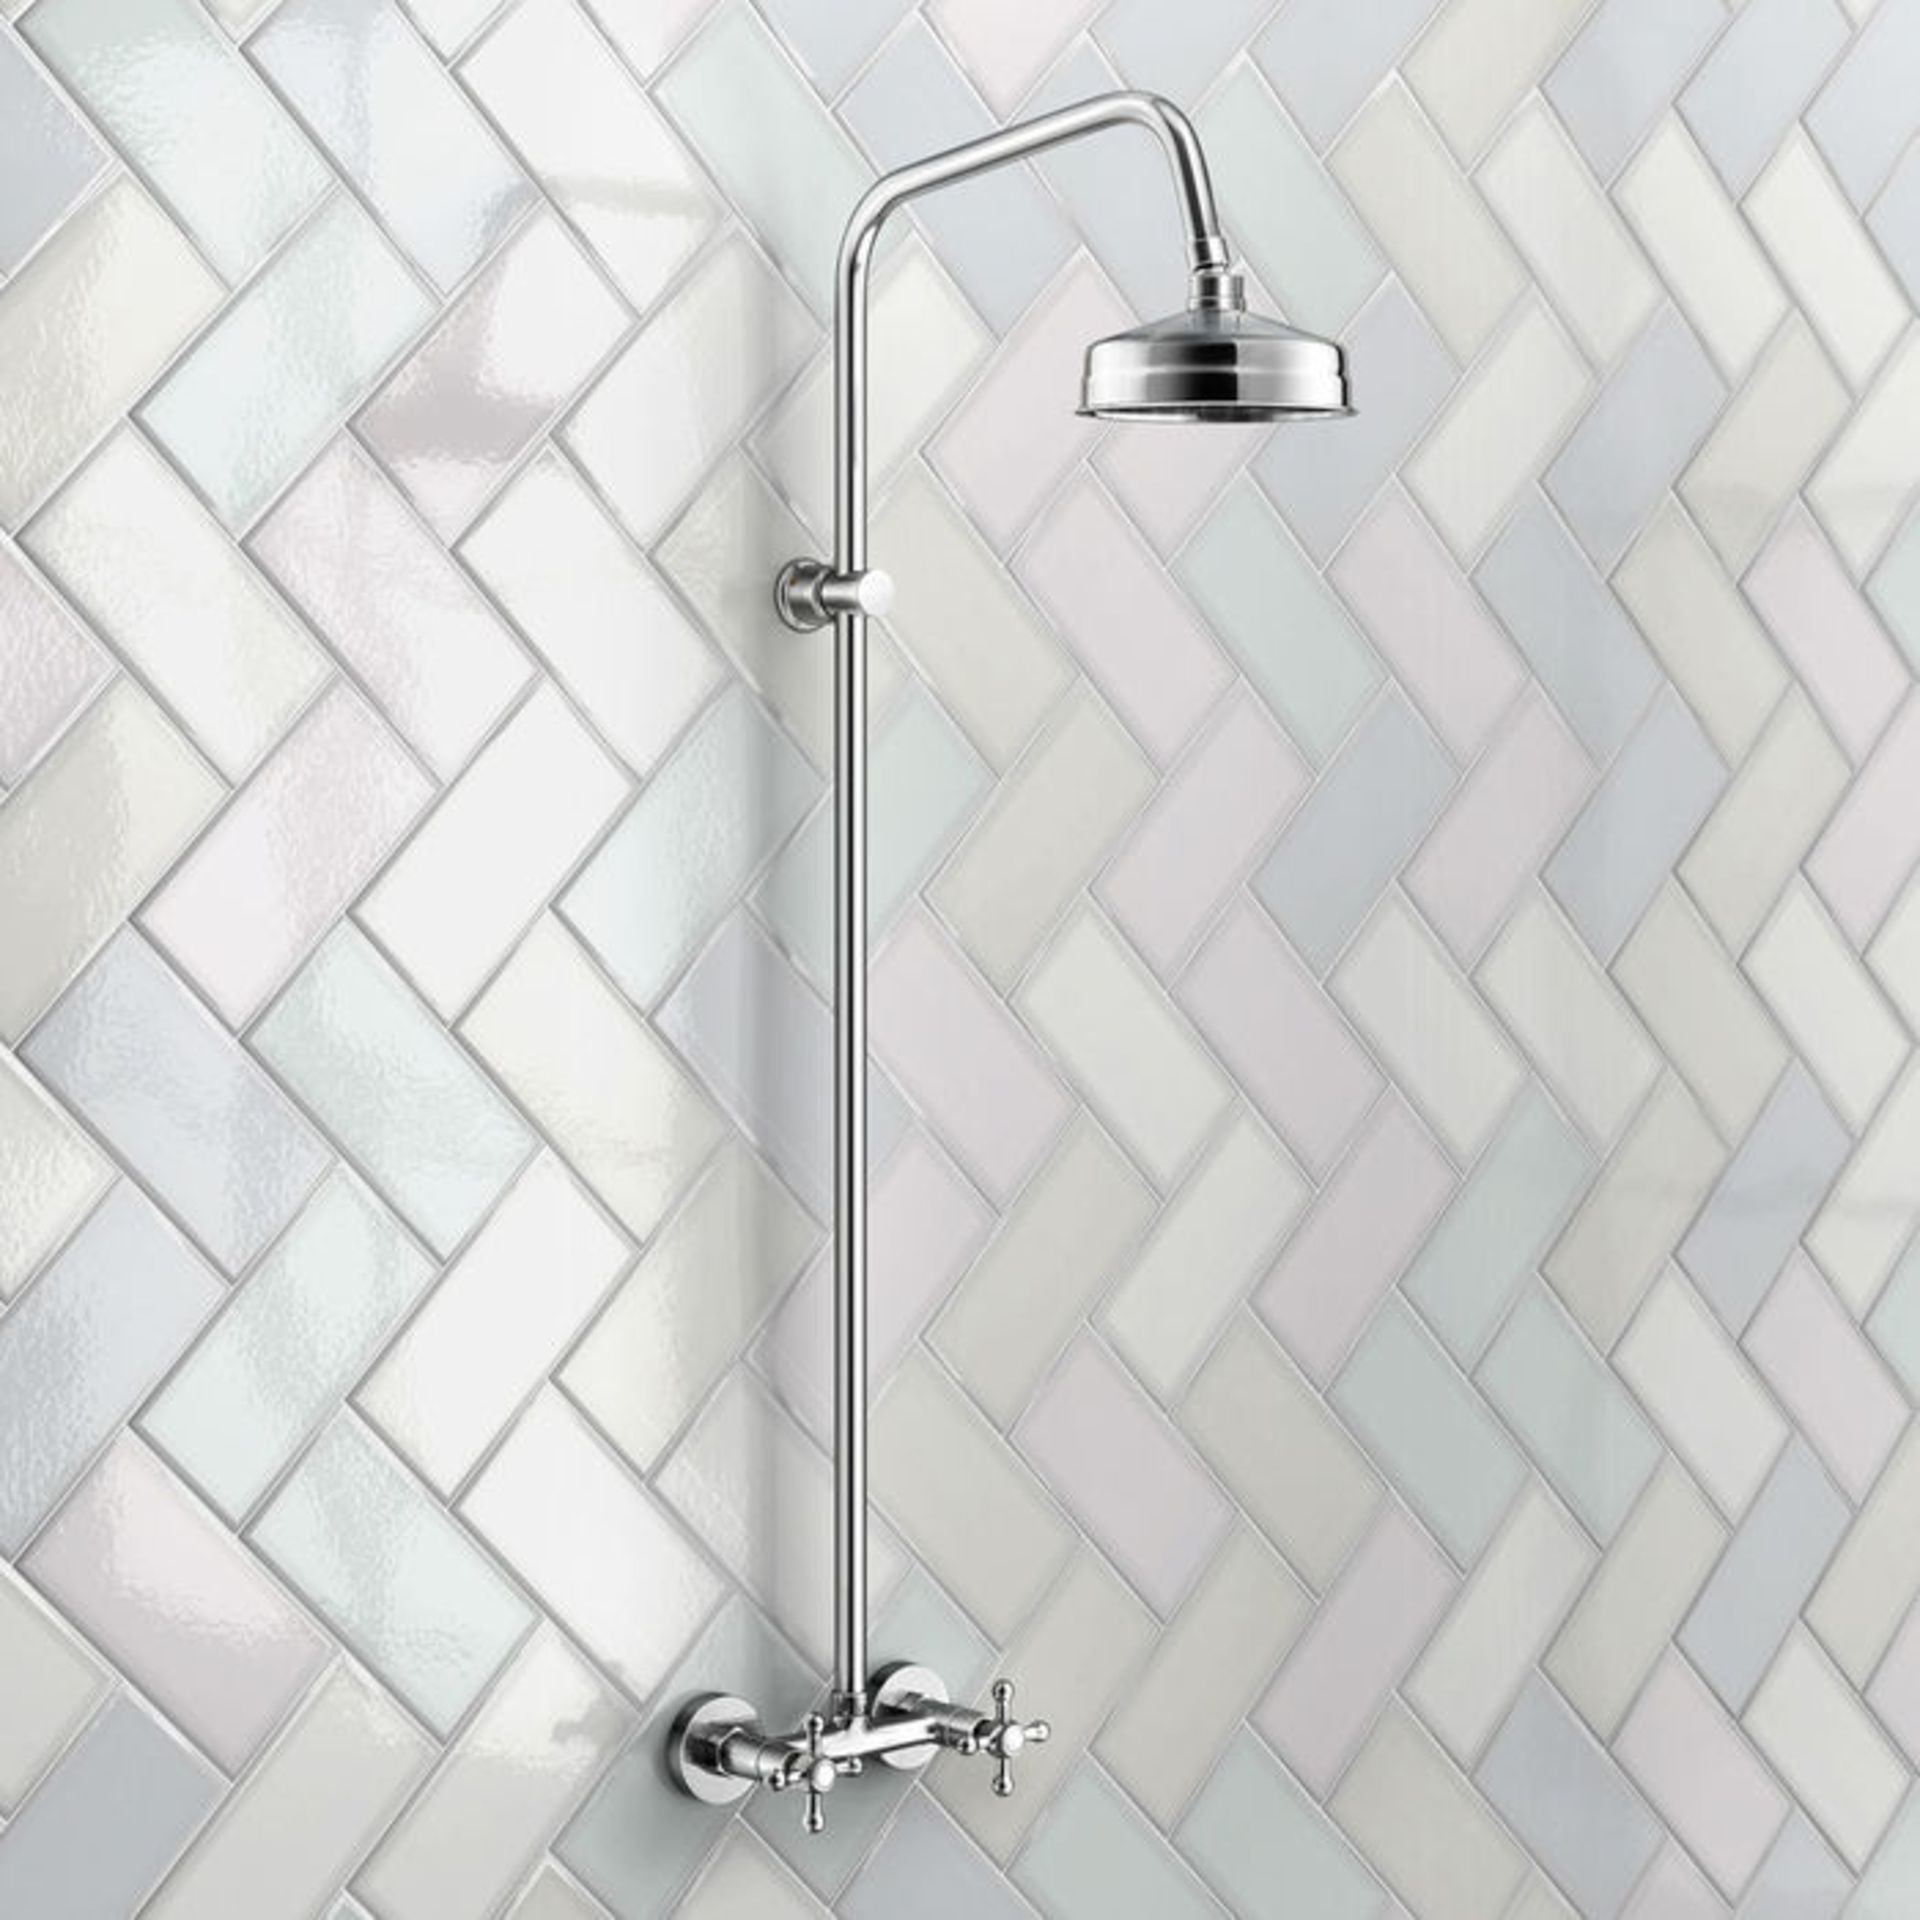 (CT193) Traditional Exposed Shower & Medium Head Exposed design makes for a statement piece Stunning - Image 3 of 3